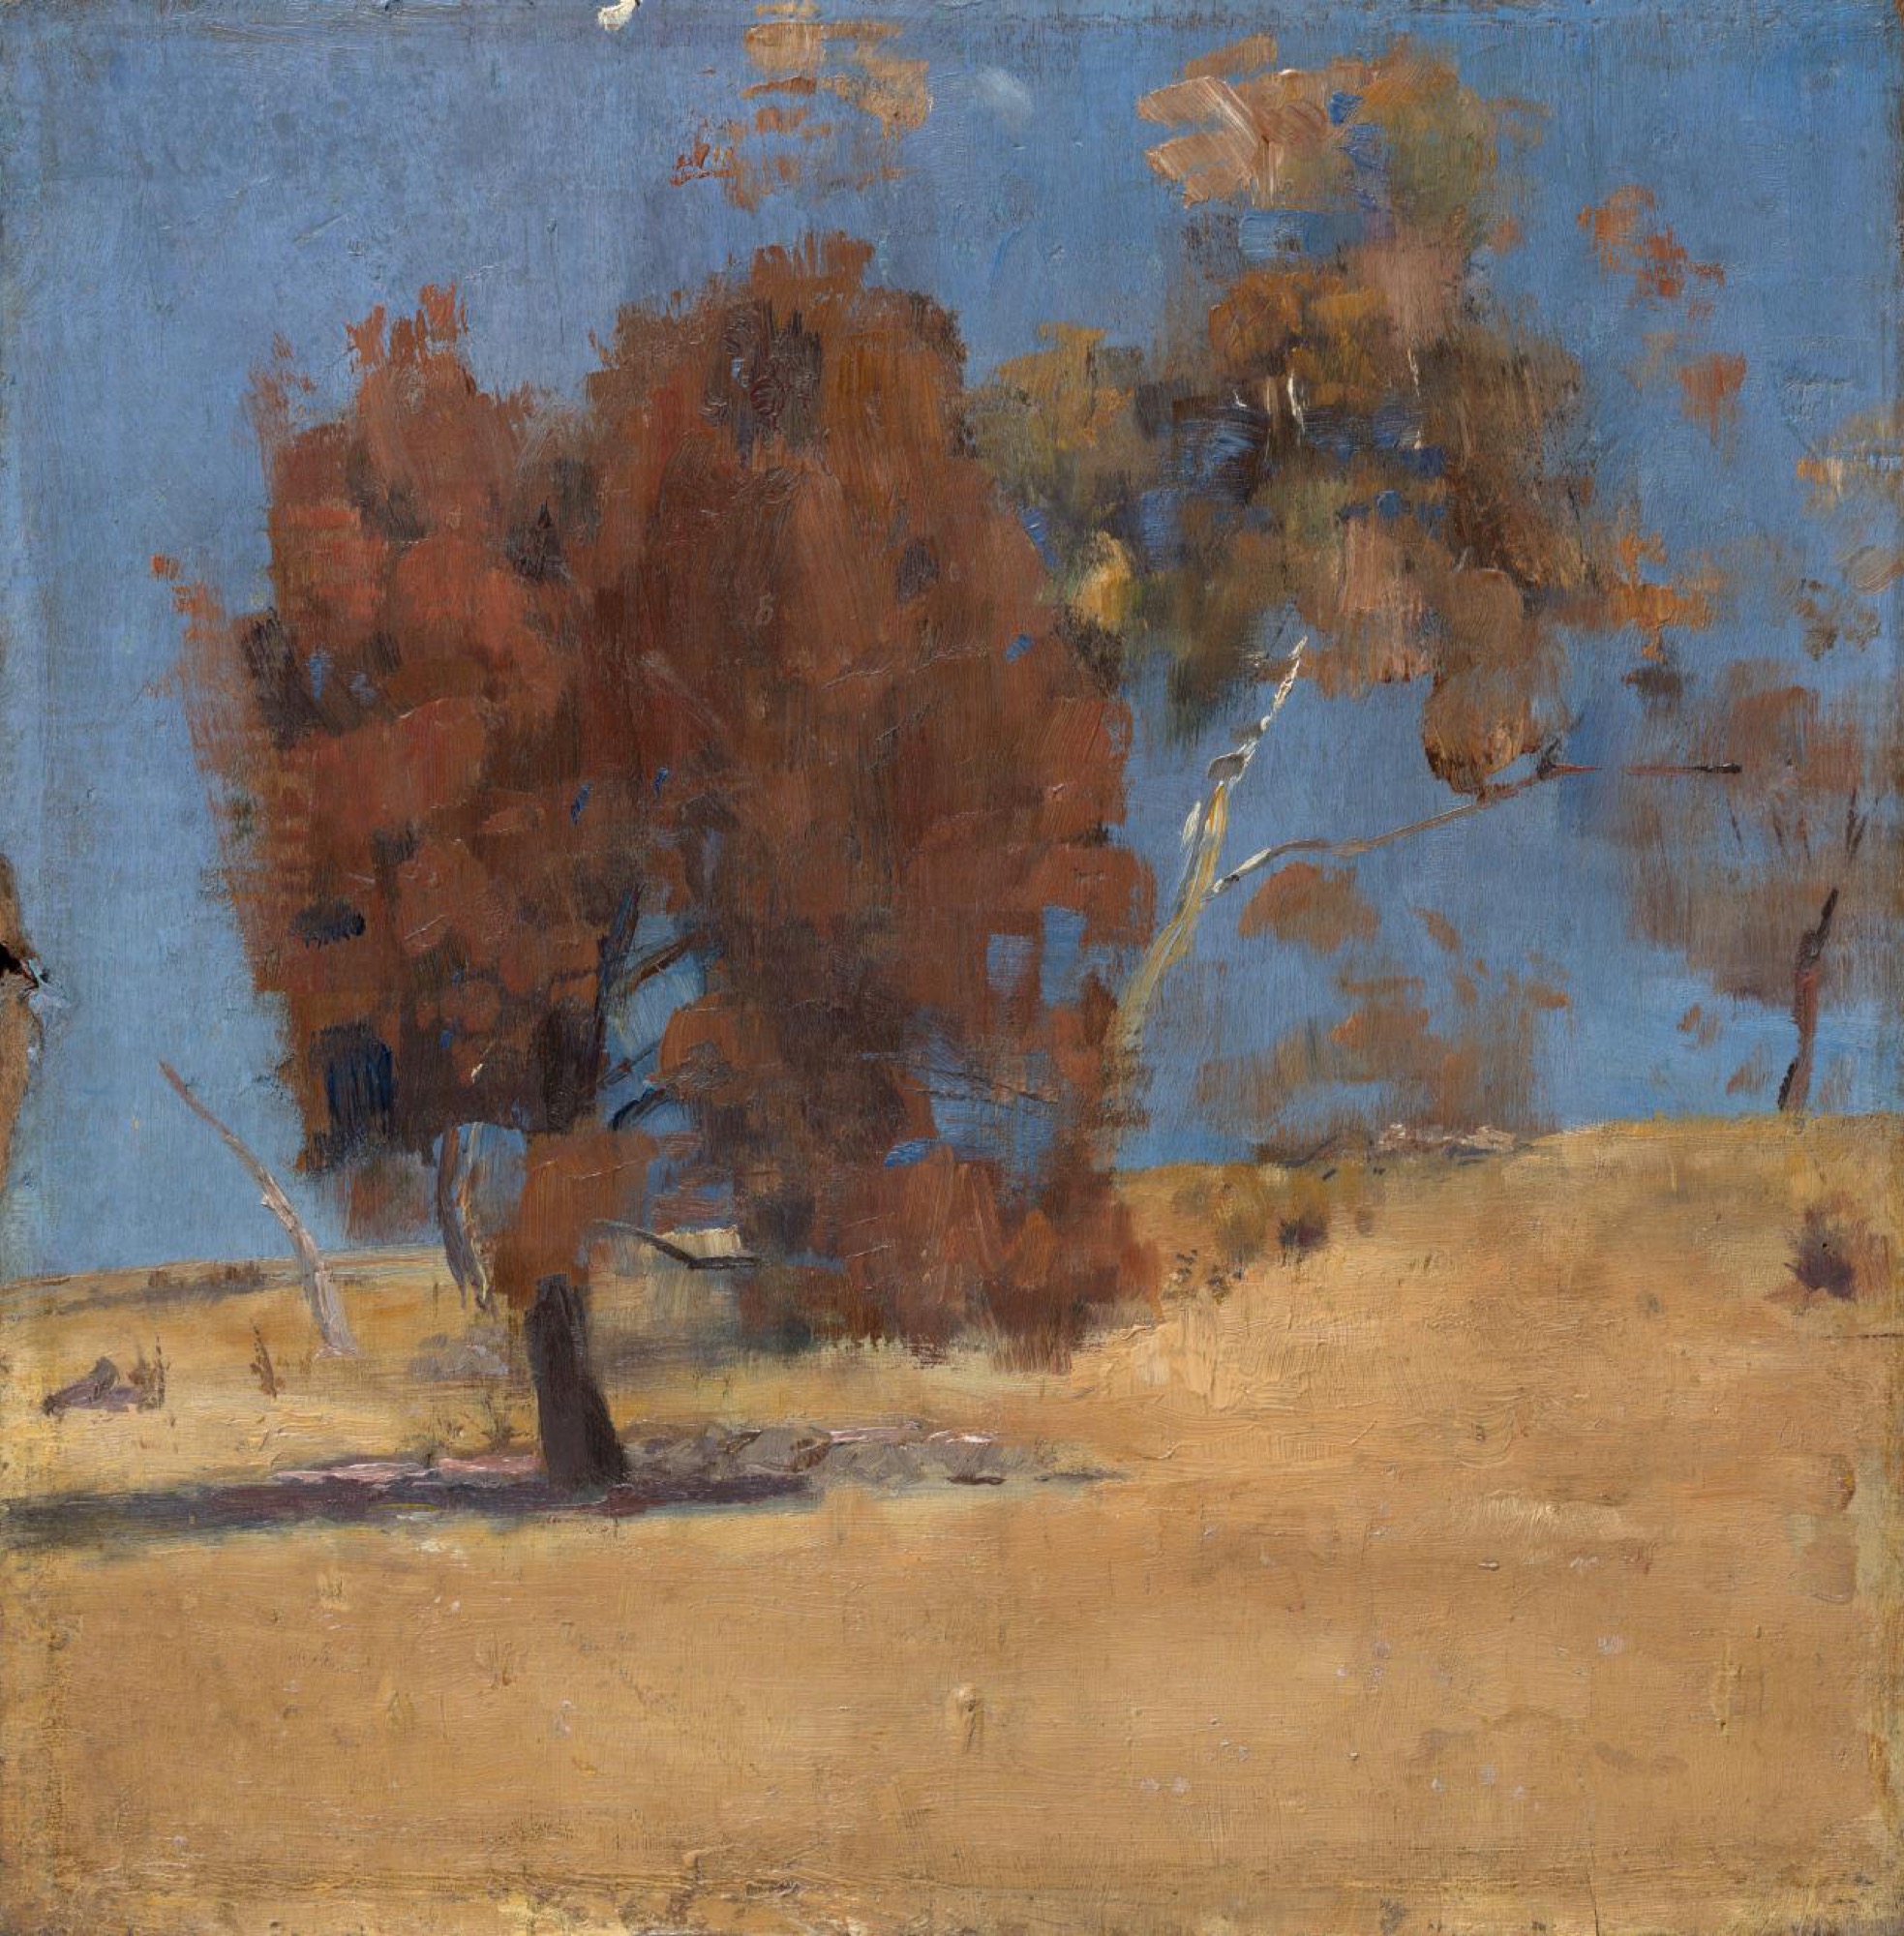 Tom Roberts, <em>She-oak and Sunlight</em>, 1889. Oil on wood panel, 30.4 × 30.1 cm. National Gallery of Victoria, Melbourne, Jean Margaret Williams Bequest, K. M. Christensen and A. E. Bond Bequest, Eleanor M. Borrow Bequest, The Thomas Rubie Purcell and Olive Esma Purcell Trust and Warren Clark Bequest, 2019.